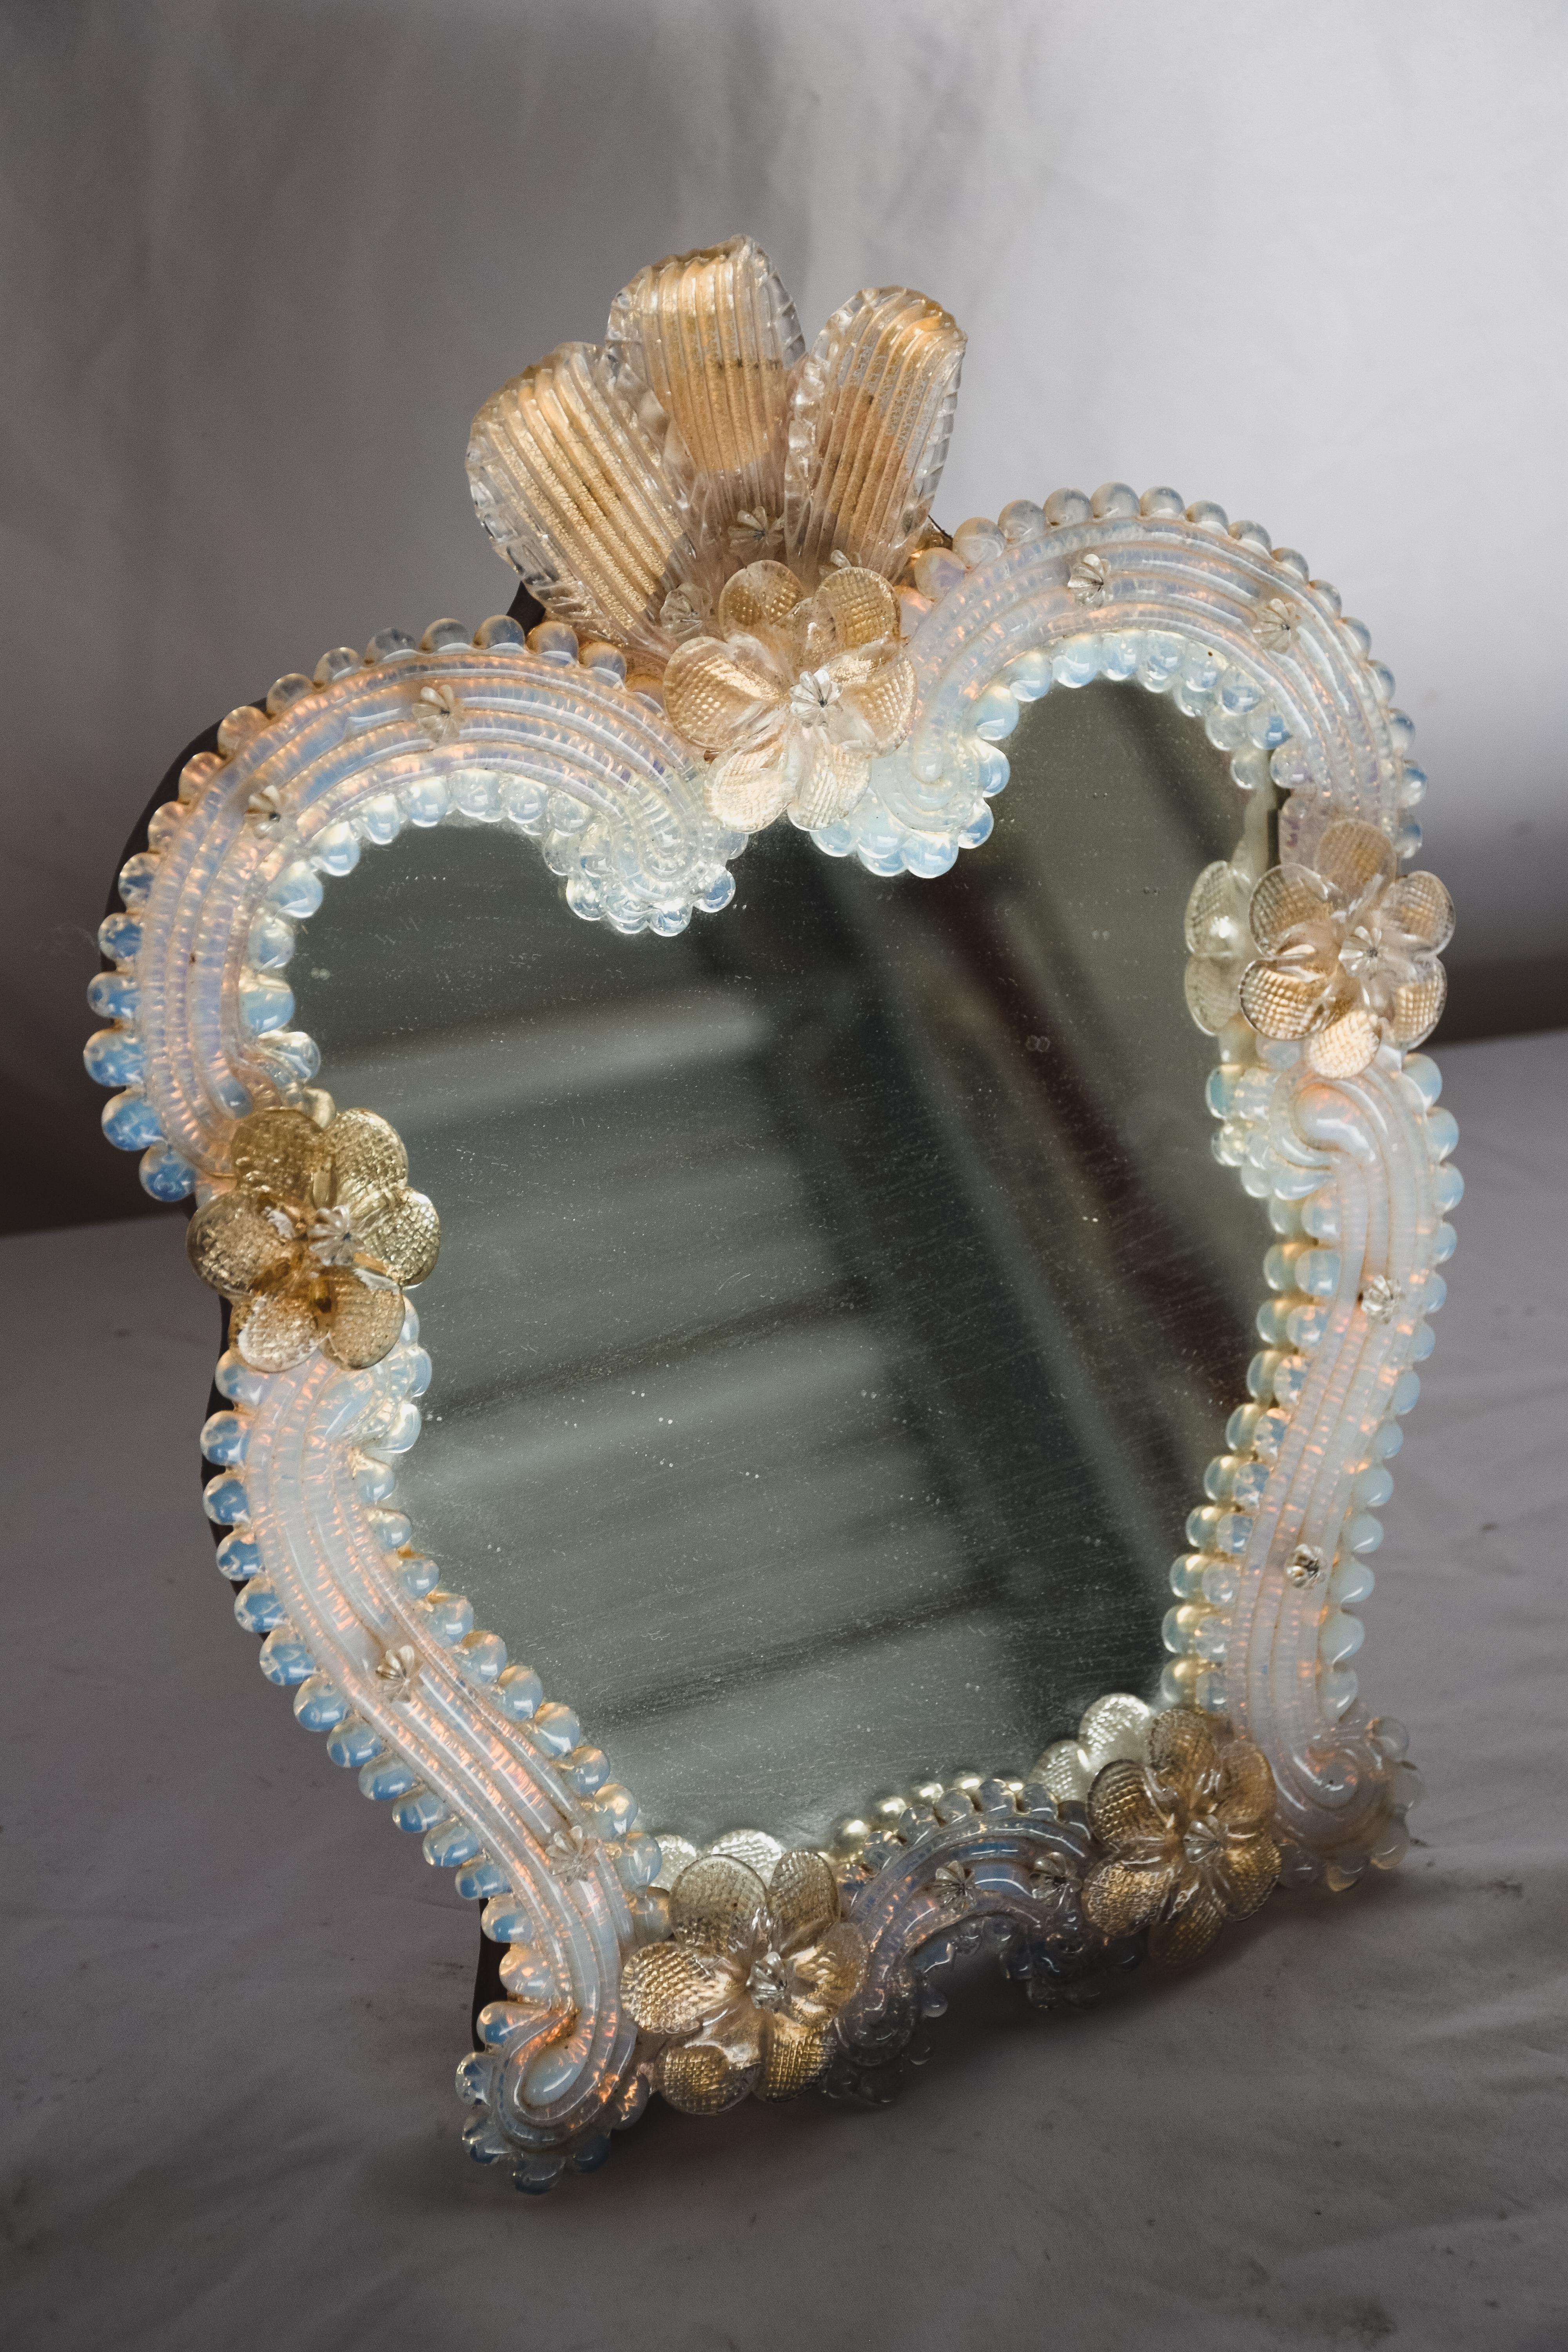 Mid 20th-century Venetian mirror with floral accents. Fantastic vintage Venetian standing table mirror. Gorgeous hand blown glass with ruffles and flowers. Wooden back with stand. 